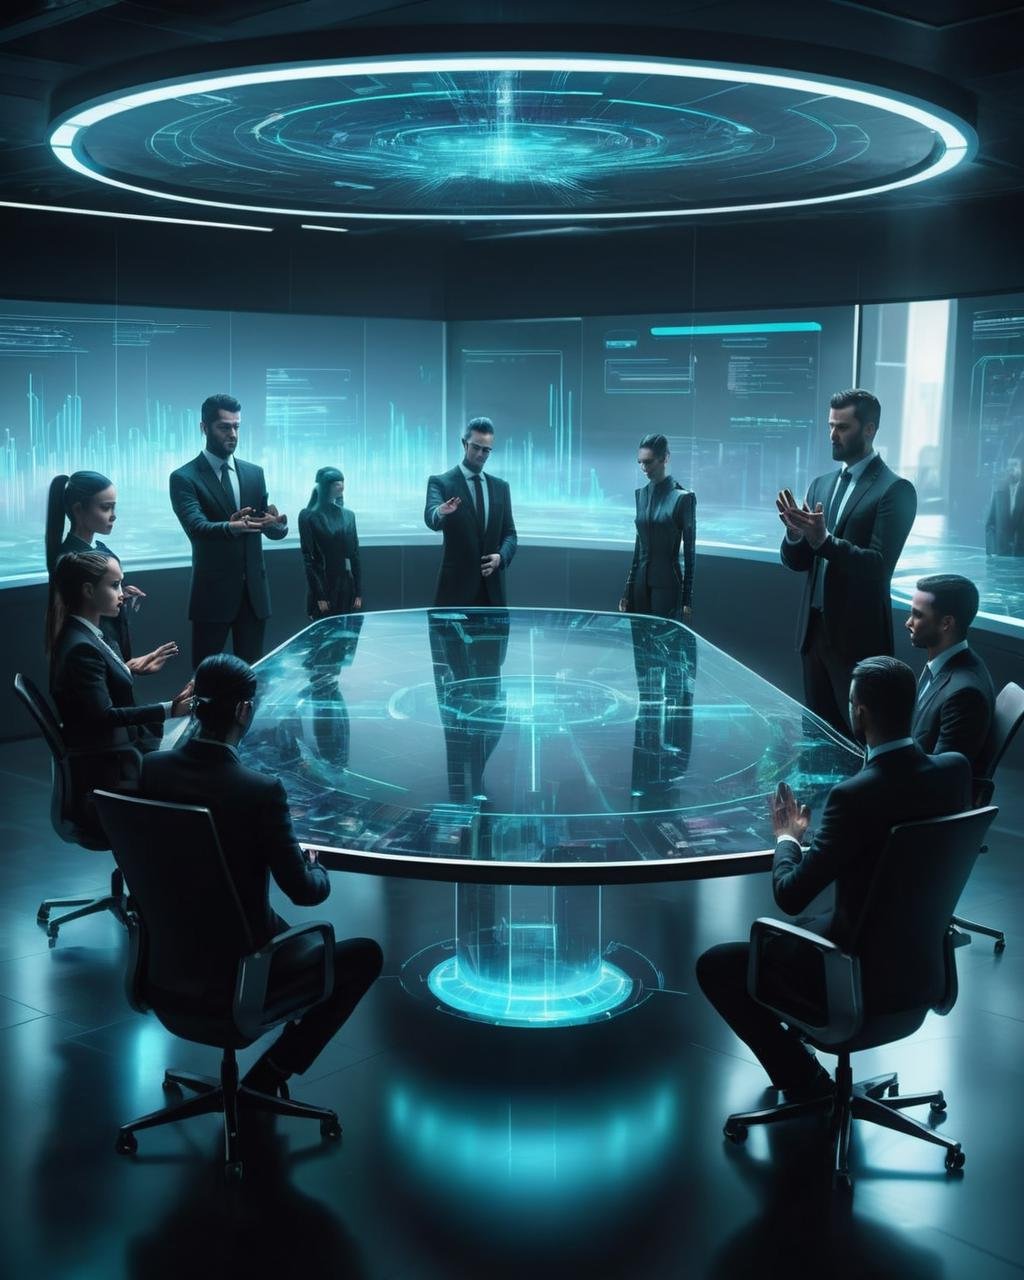 Megacorporate boardroom, executives seated around a holographic table, manipulating data with futuristic hand gestures. , cyberpunk style